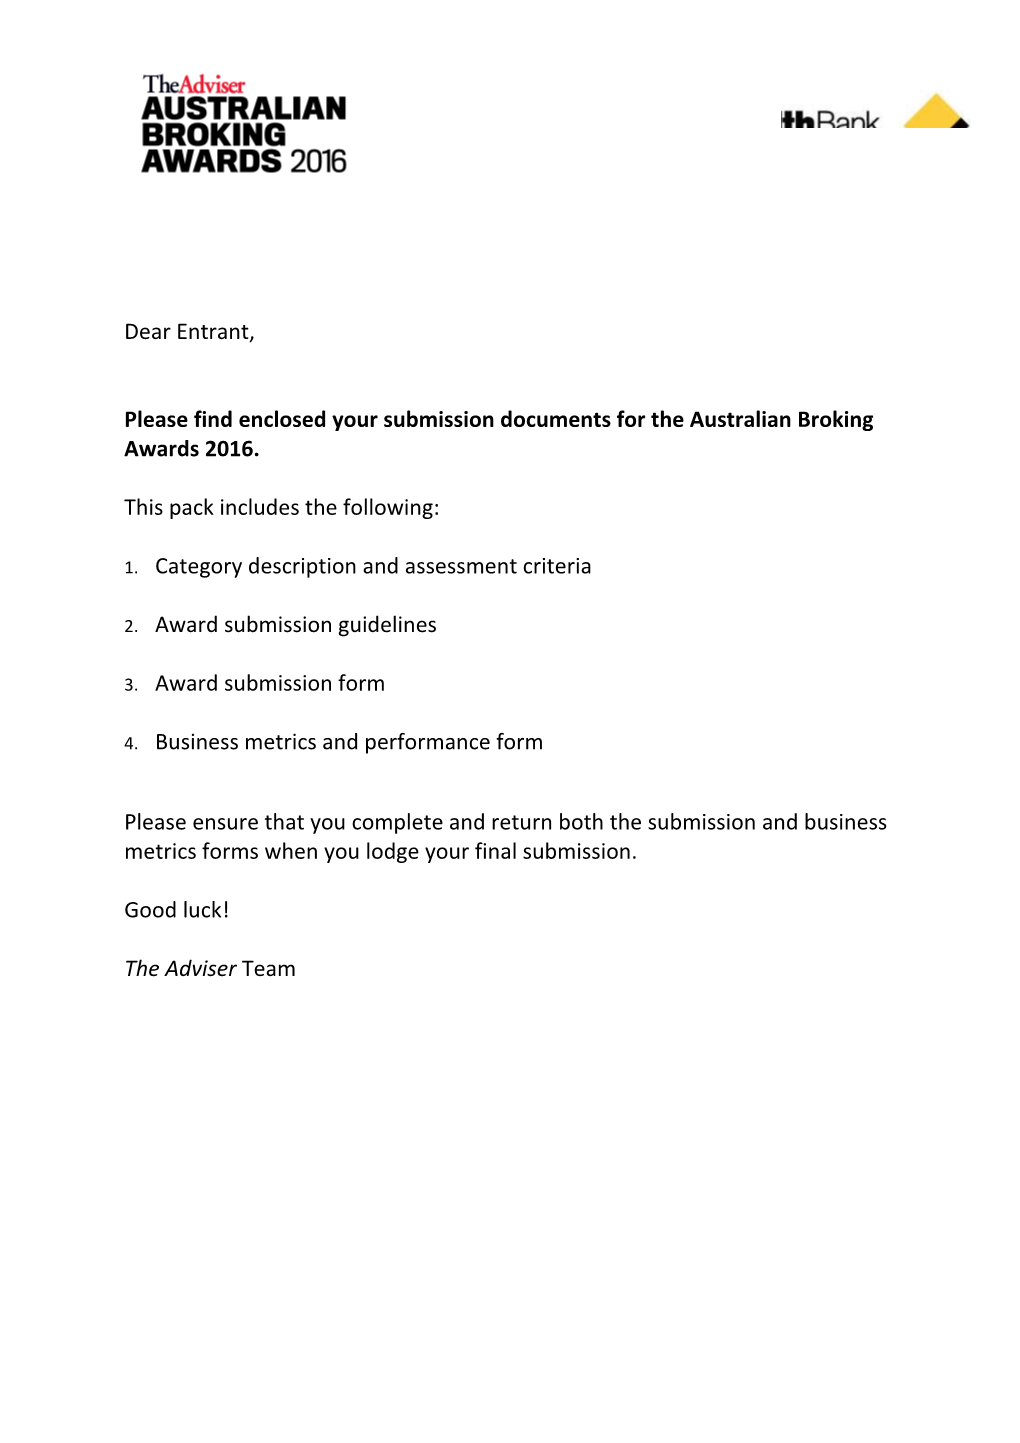 Please Find Enclosed Your Submission Documents for the Australian Broking Awards 2016